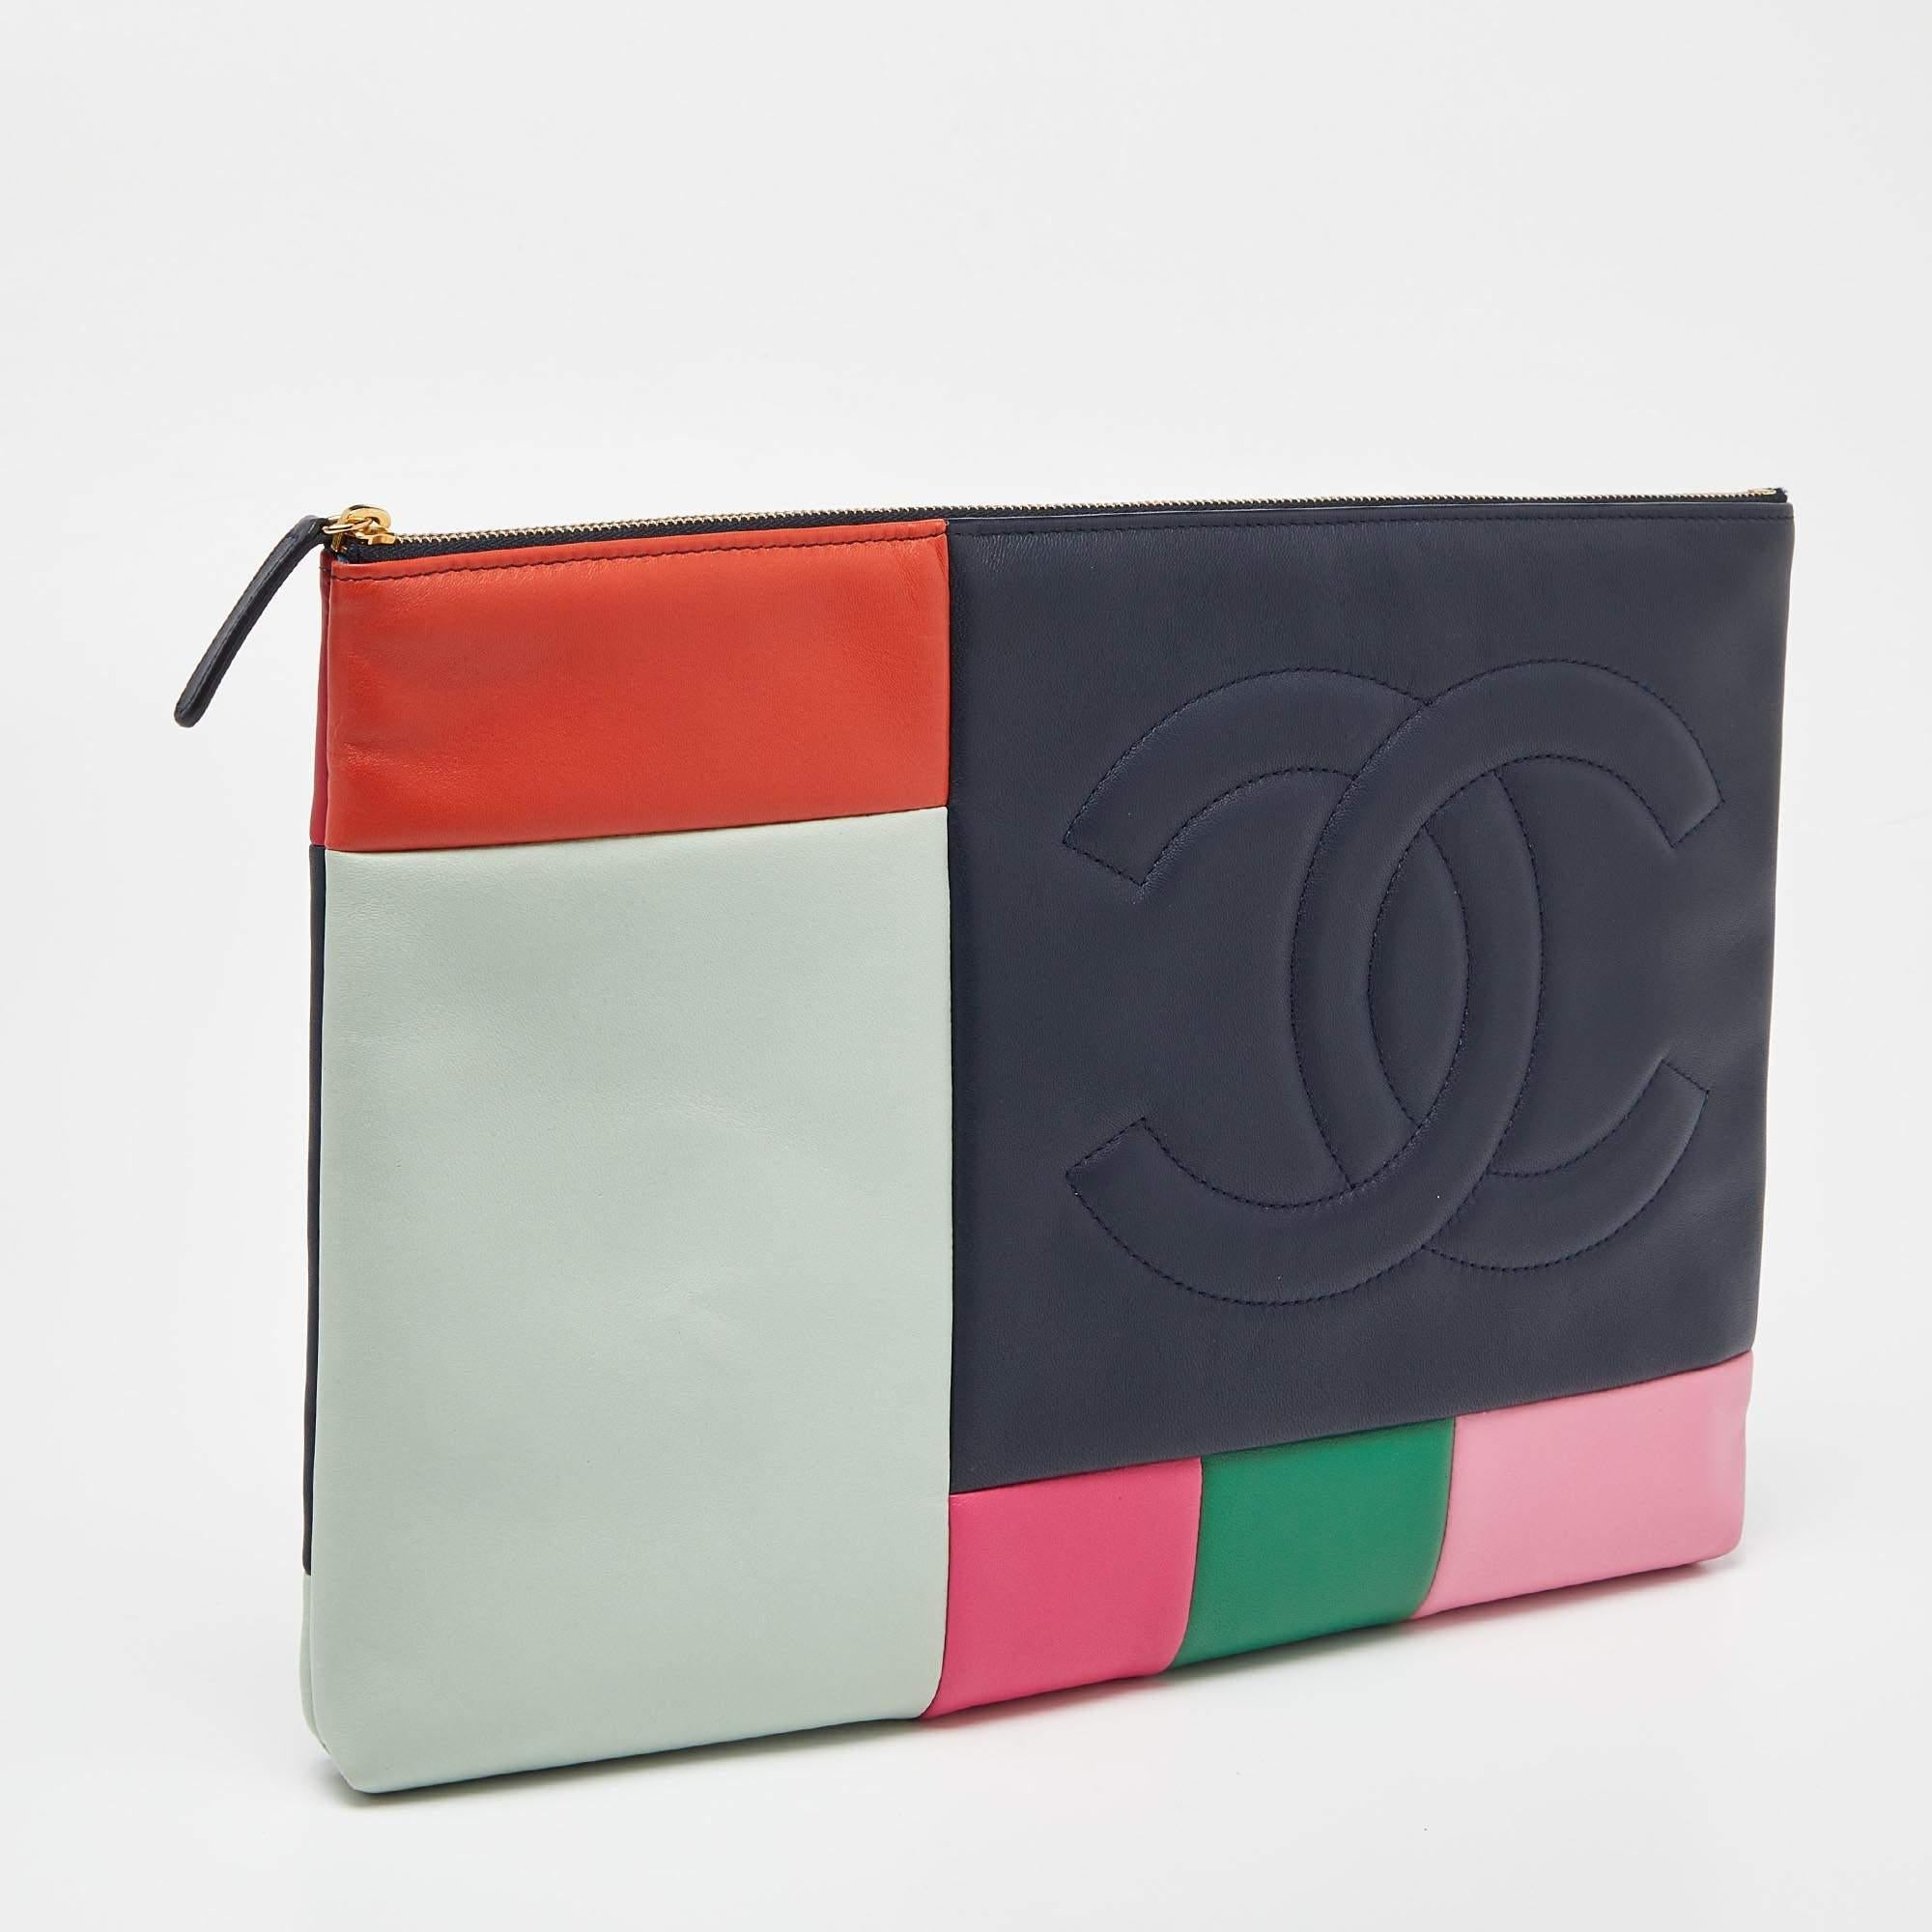 Chanel brings you the perfect day clutch! Crafted skillfully from leather into a patchwork design, the multicolored piece is adorned with a stitched brand logo on the front and has a zipper that opens into a well-sized interior to hold your